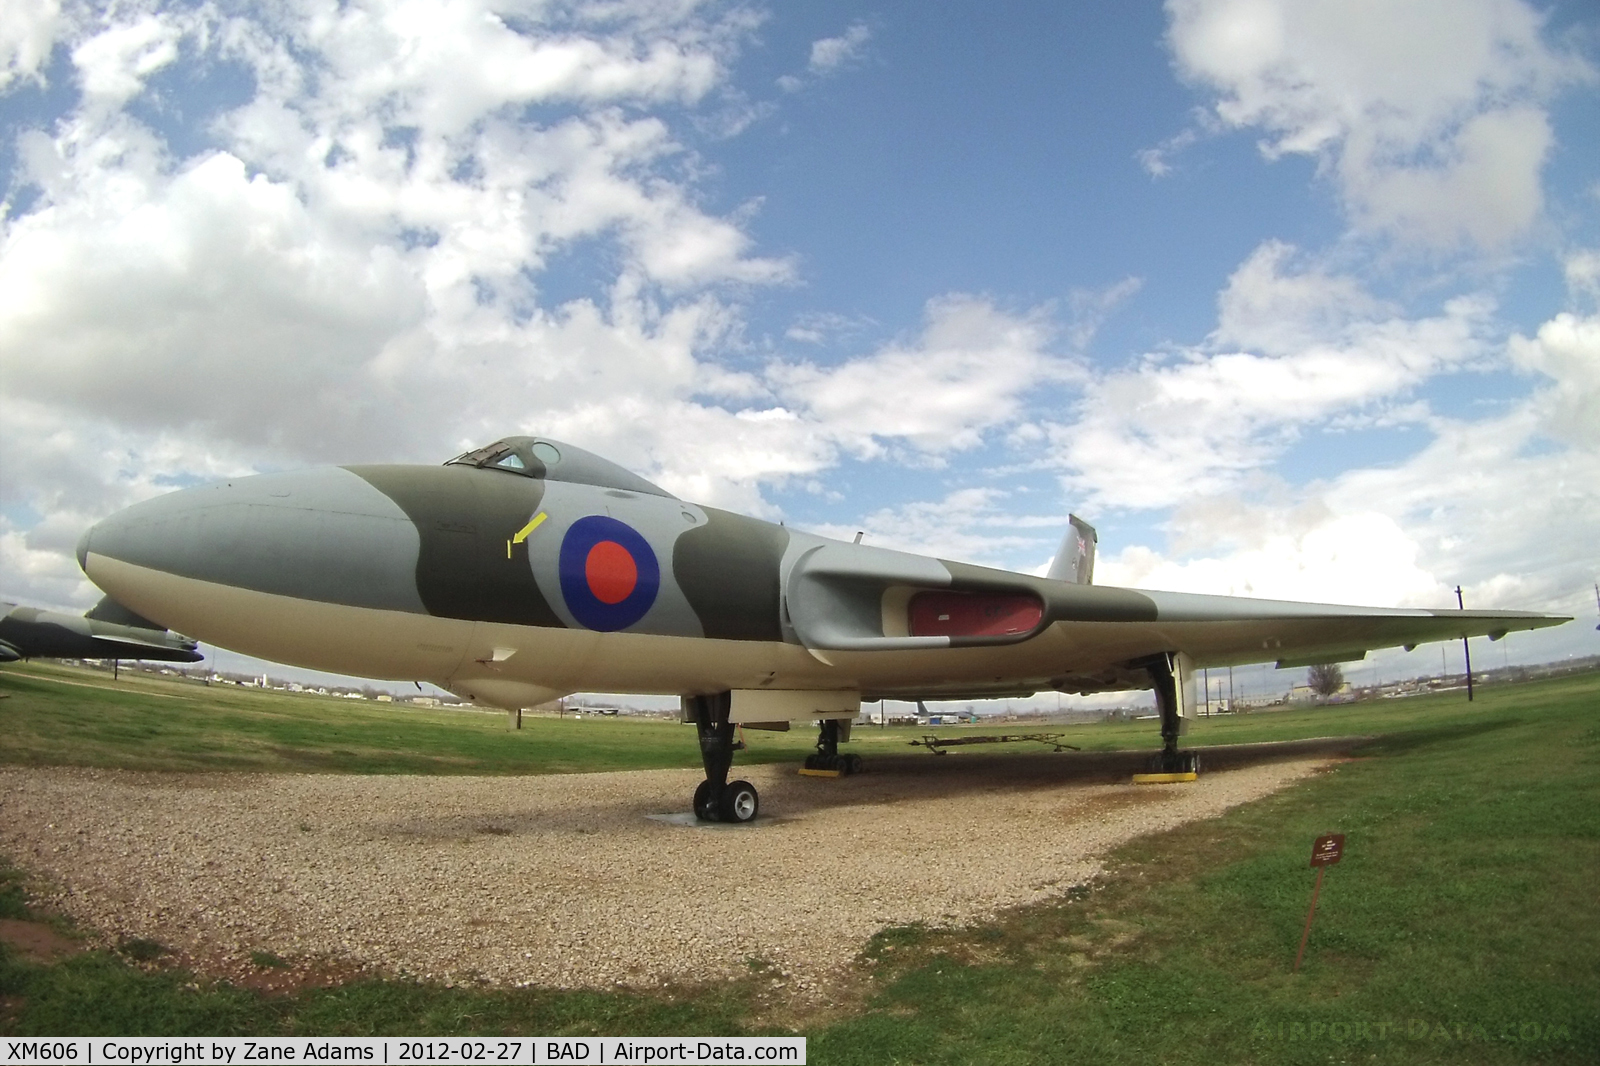 XM606, 1963 Avro Vulcan B.2 C/N Set 70, At the 8th Air Force Museum - Barksdale AFB